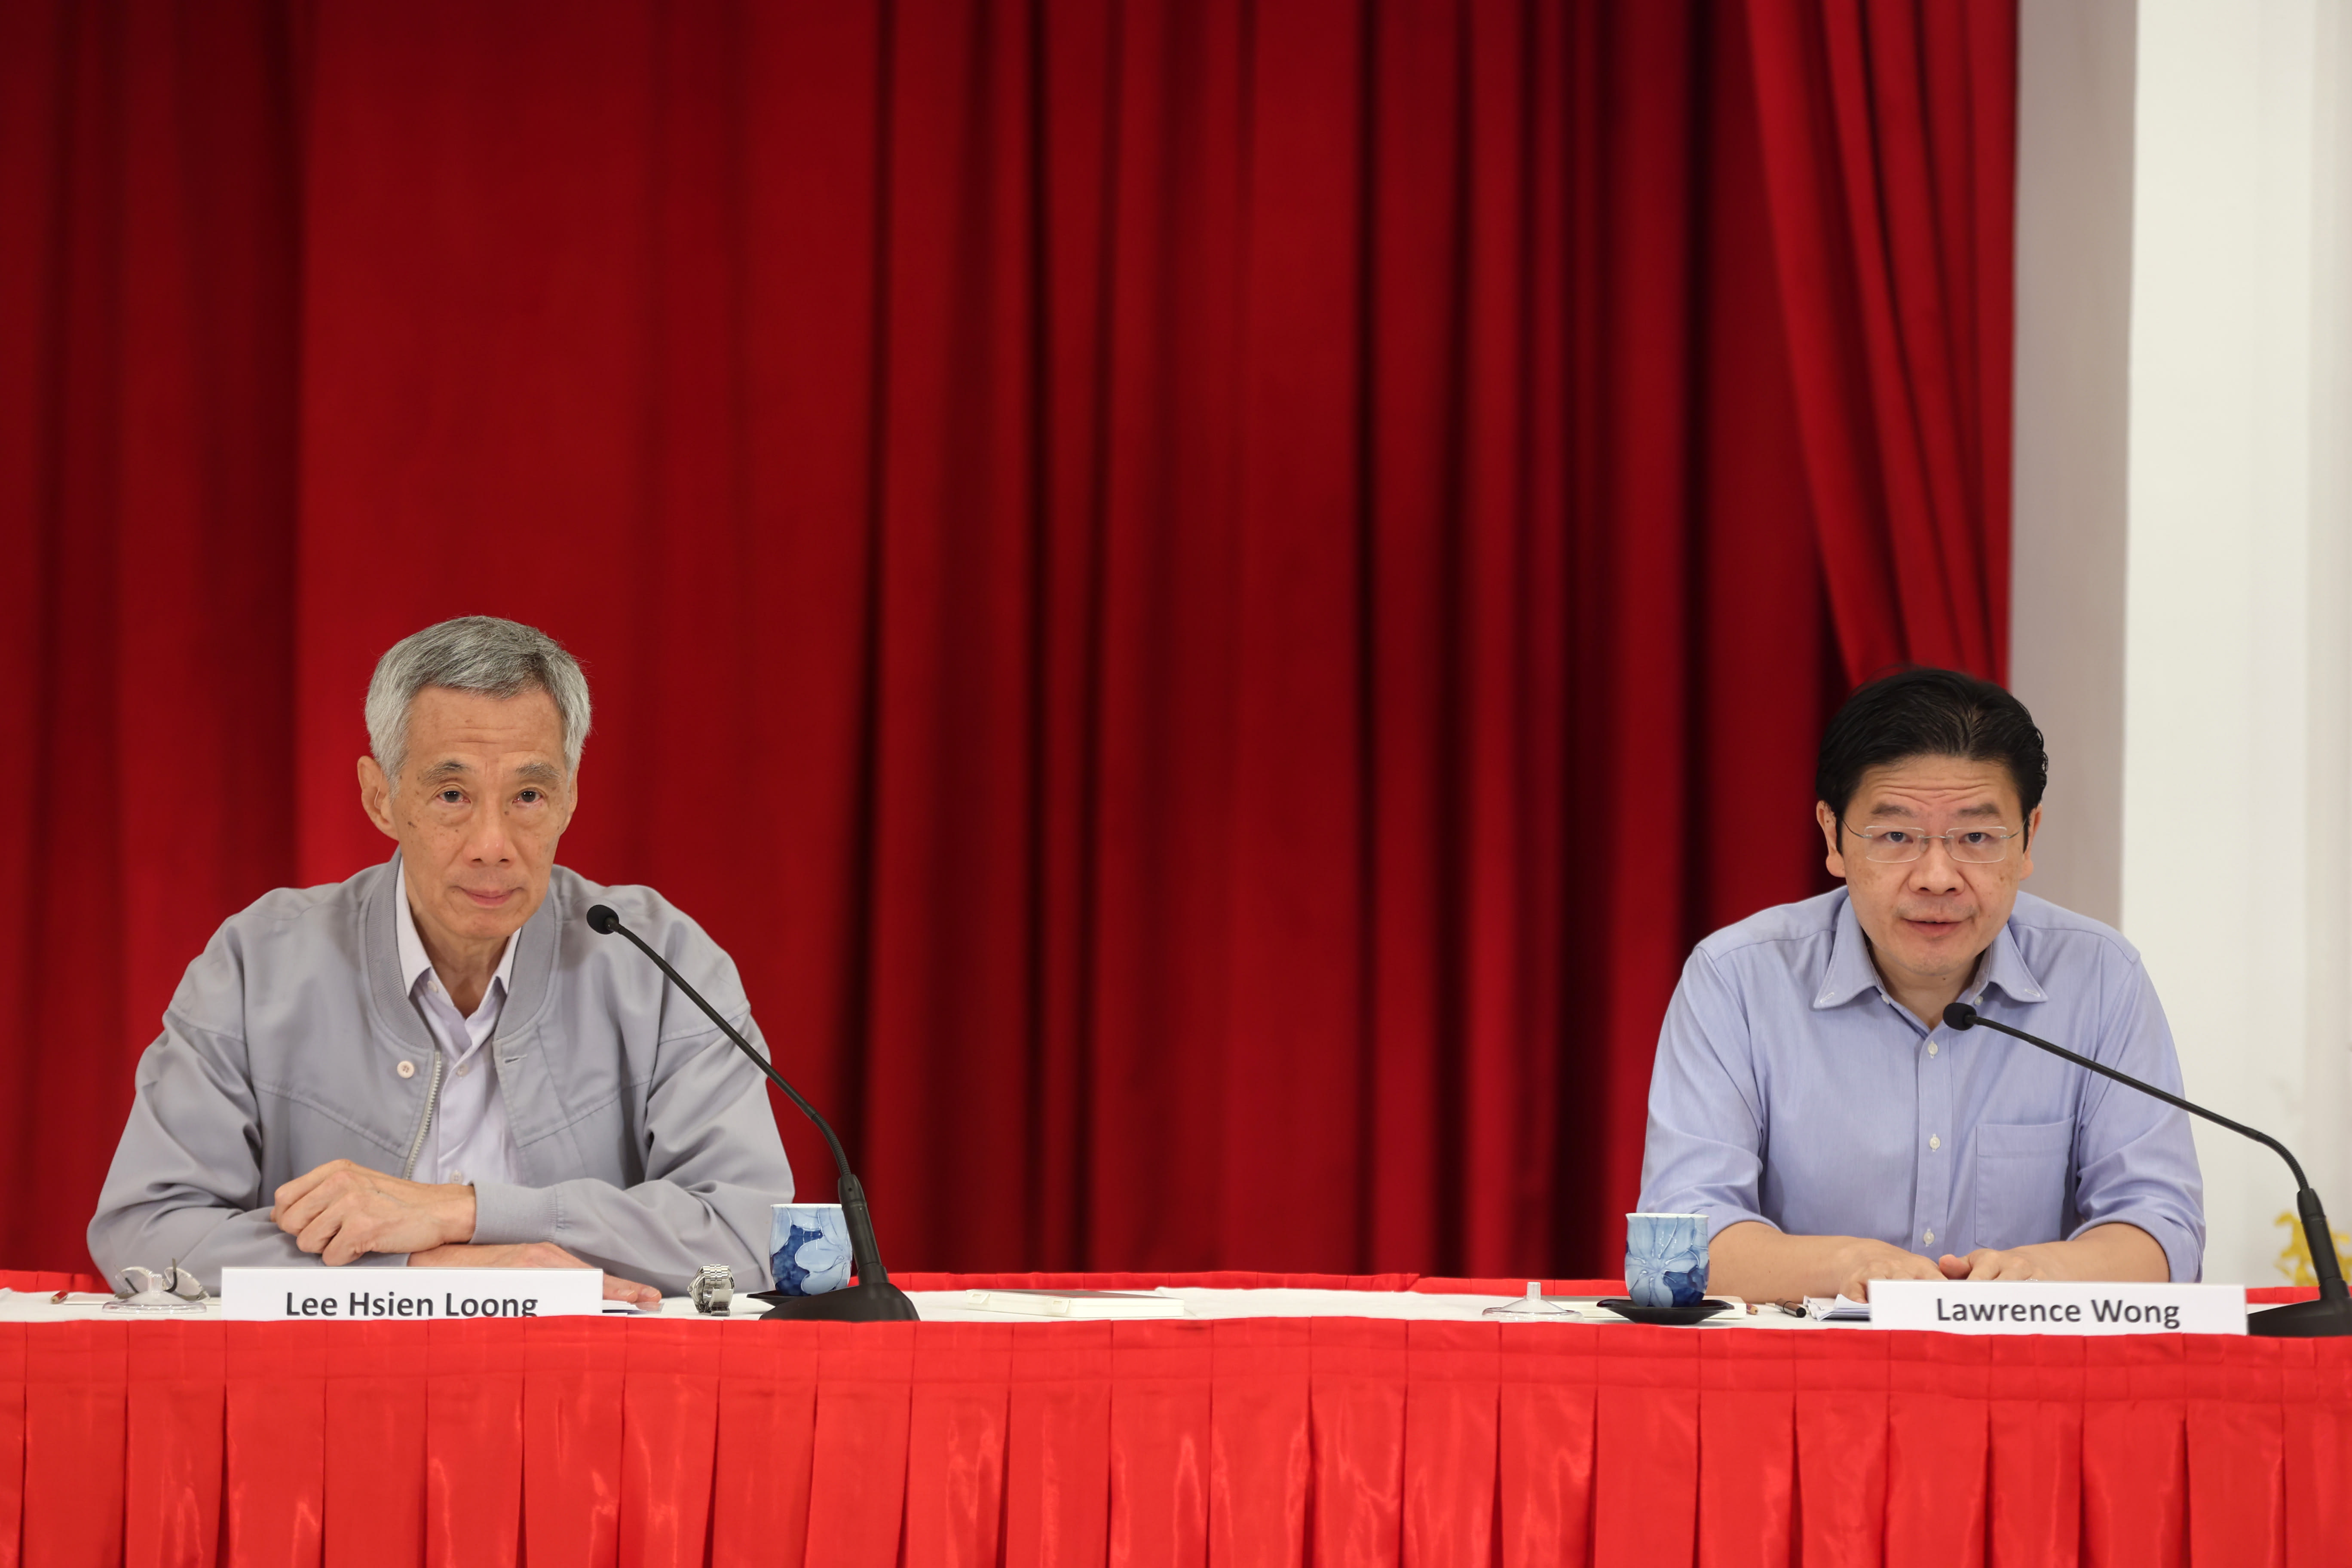 At the media conference on April 16, Mr Lee indicated two obvious options on the handover, which would mark the conclusion of the leadership succession and renewal from the 3G to the 4G.